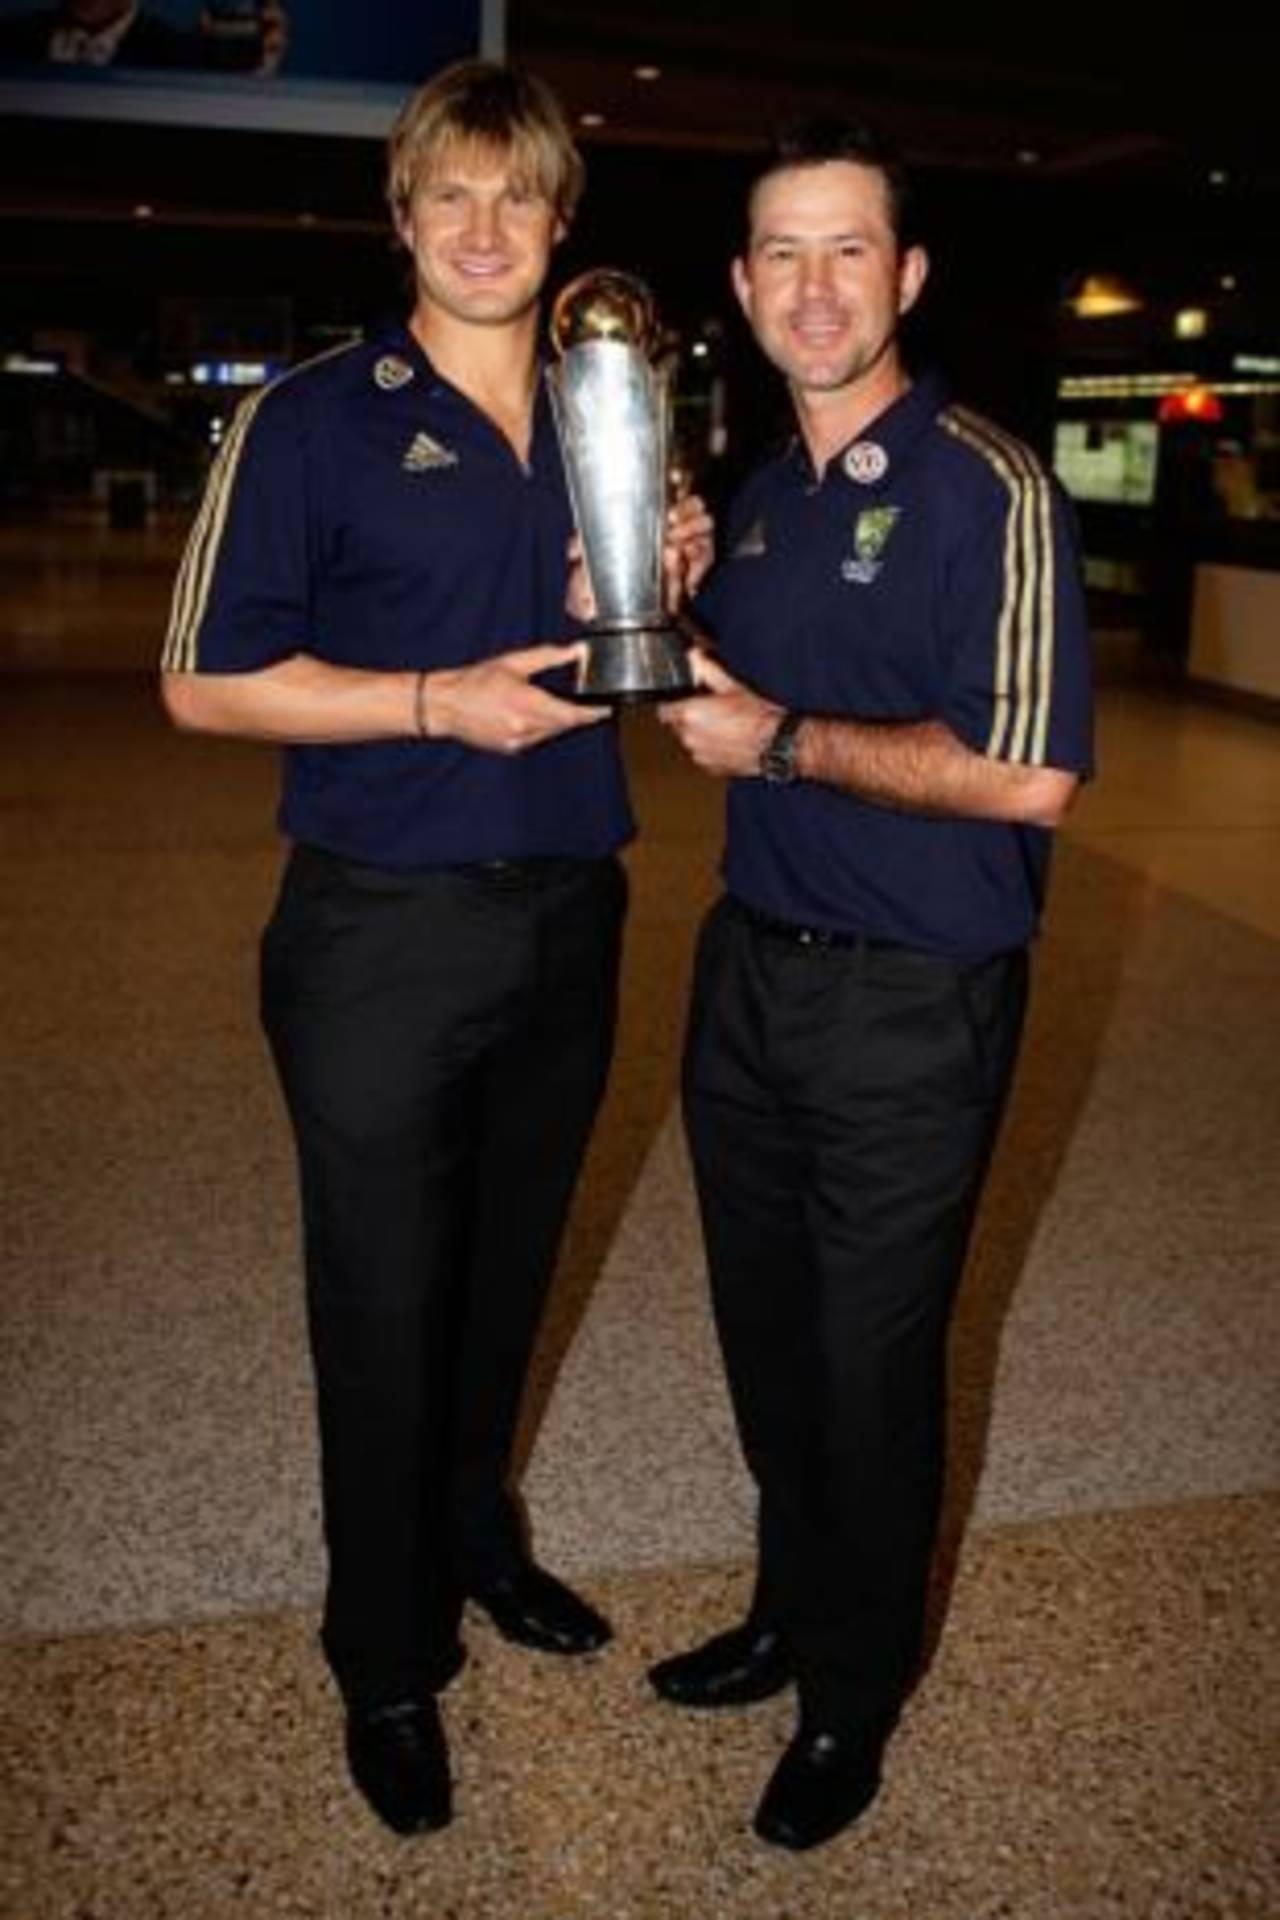 Shane Watson and Ricky Ponting with the Champions Trophy after arriving home, Sydney, October 7, 2009